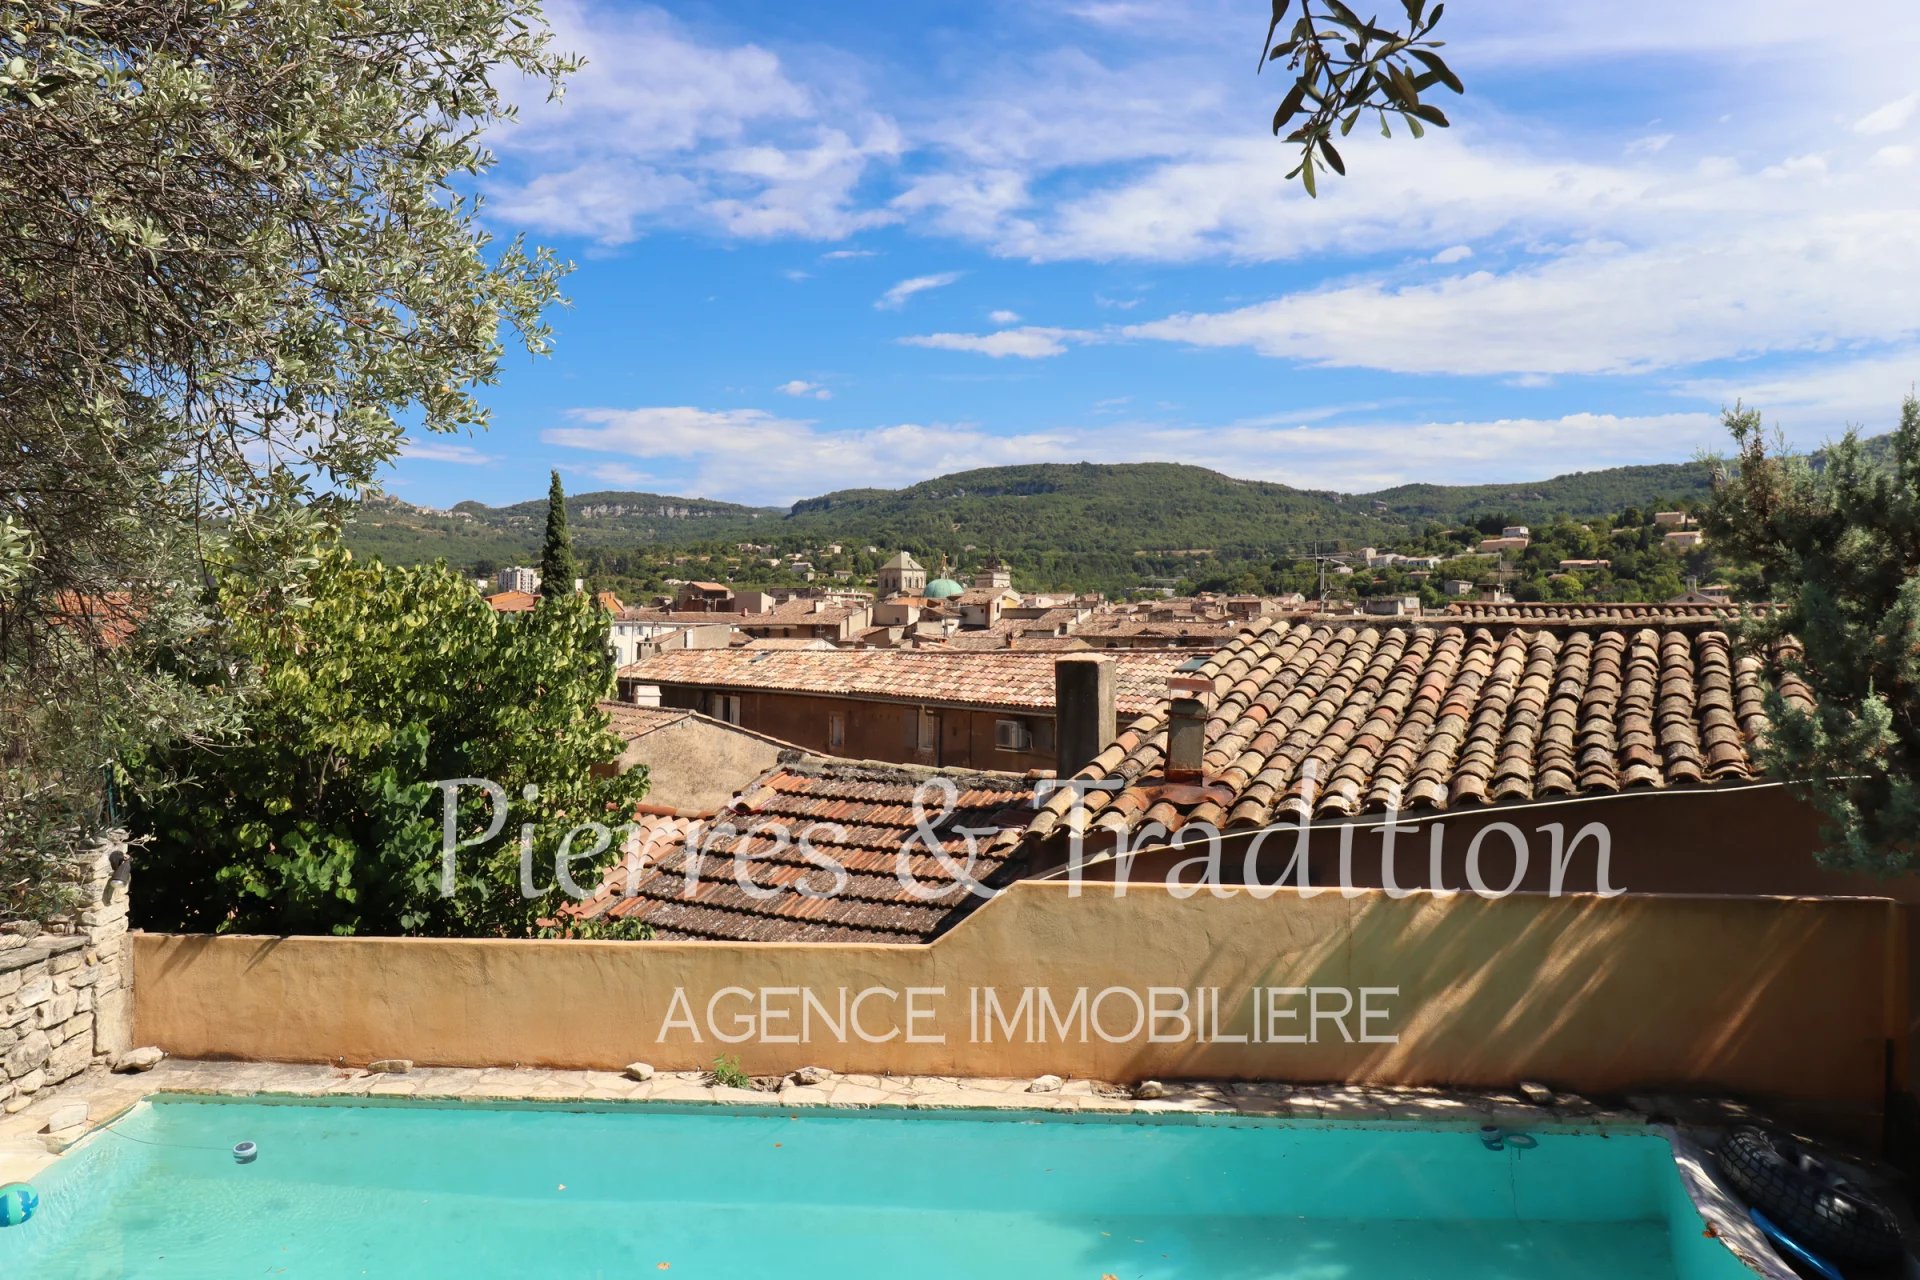 Luberon, Apt, Very nice town house of 175 m² with garage, garden and swimming pool.